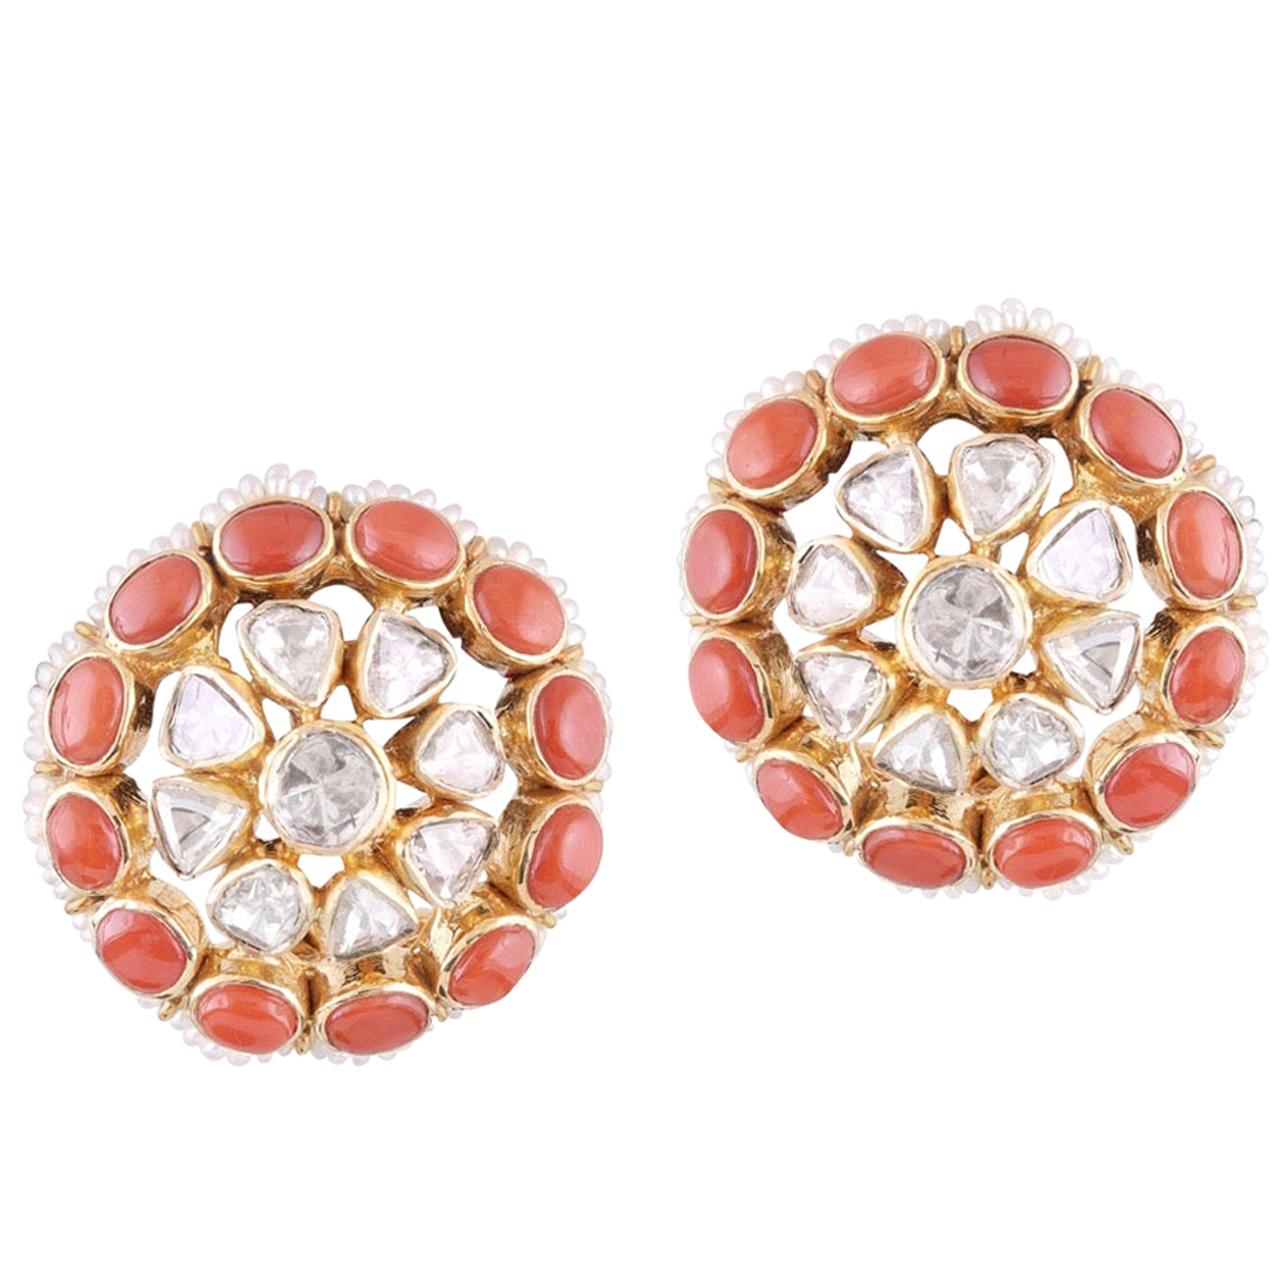 18k Gold Handcrafted Coral Cultured Pearls Polki White Diamond Stud Earrings